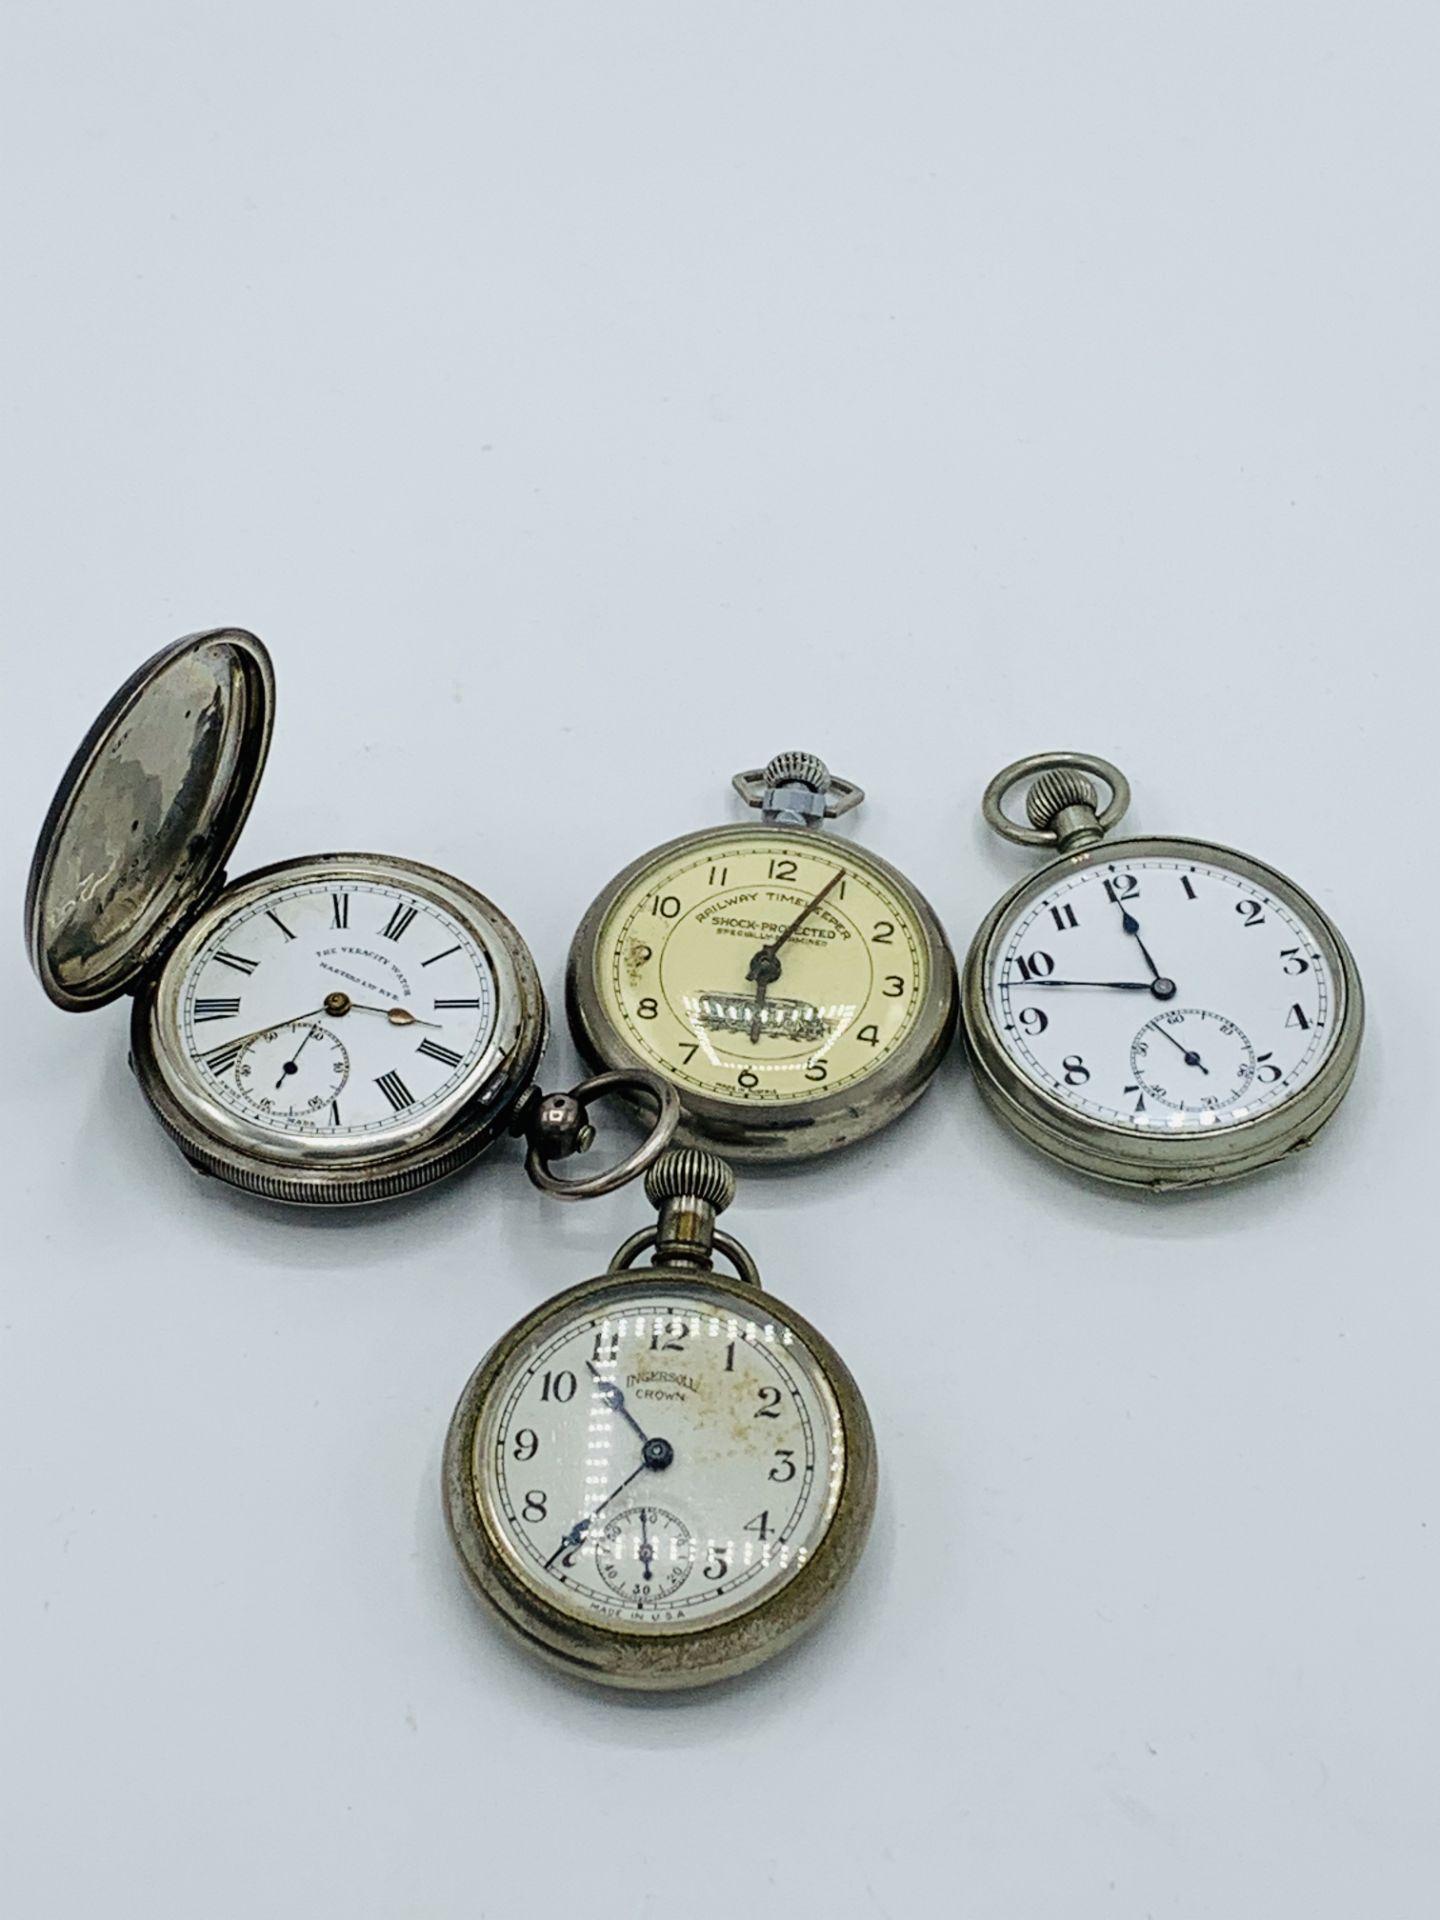 Silver case pocket watch marked The Veracity Watch, Masters Ltd., Rye; and 3 other pocket watches